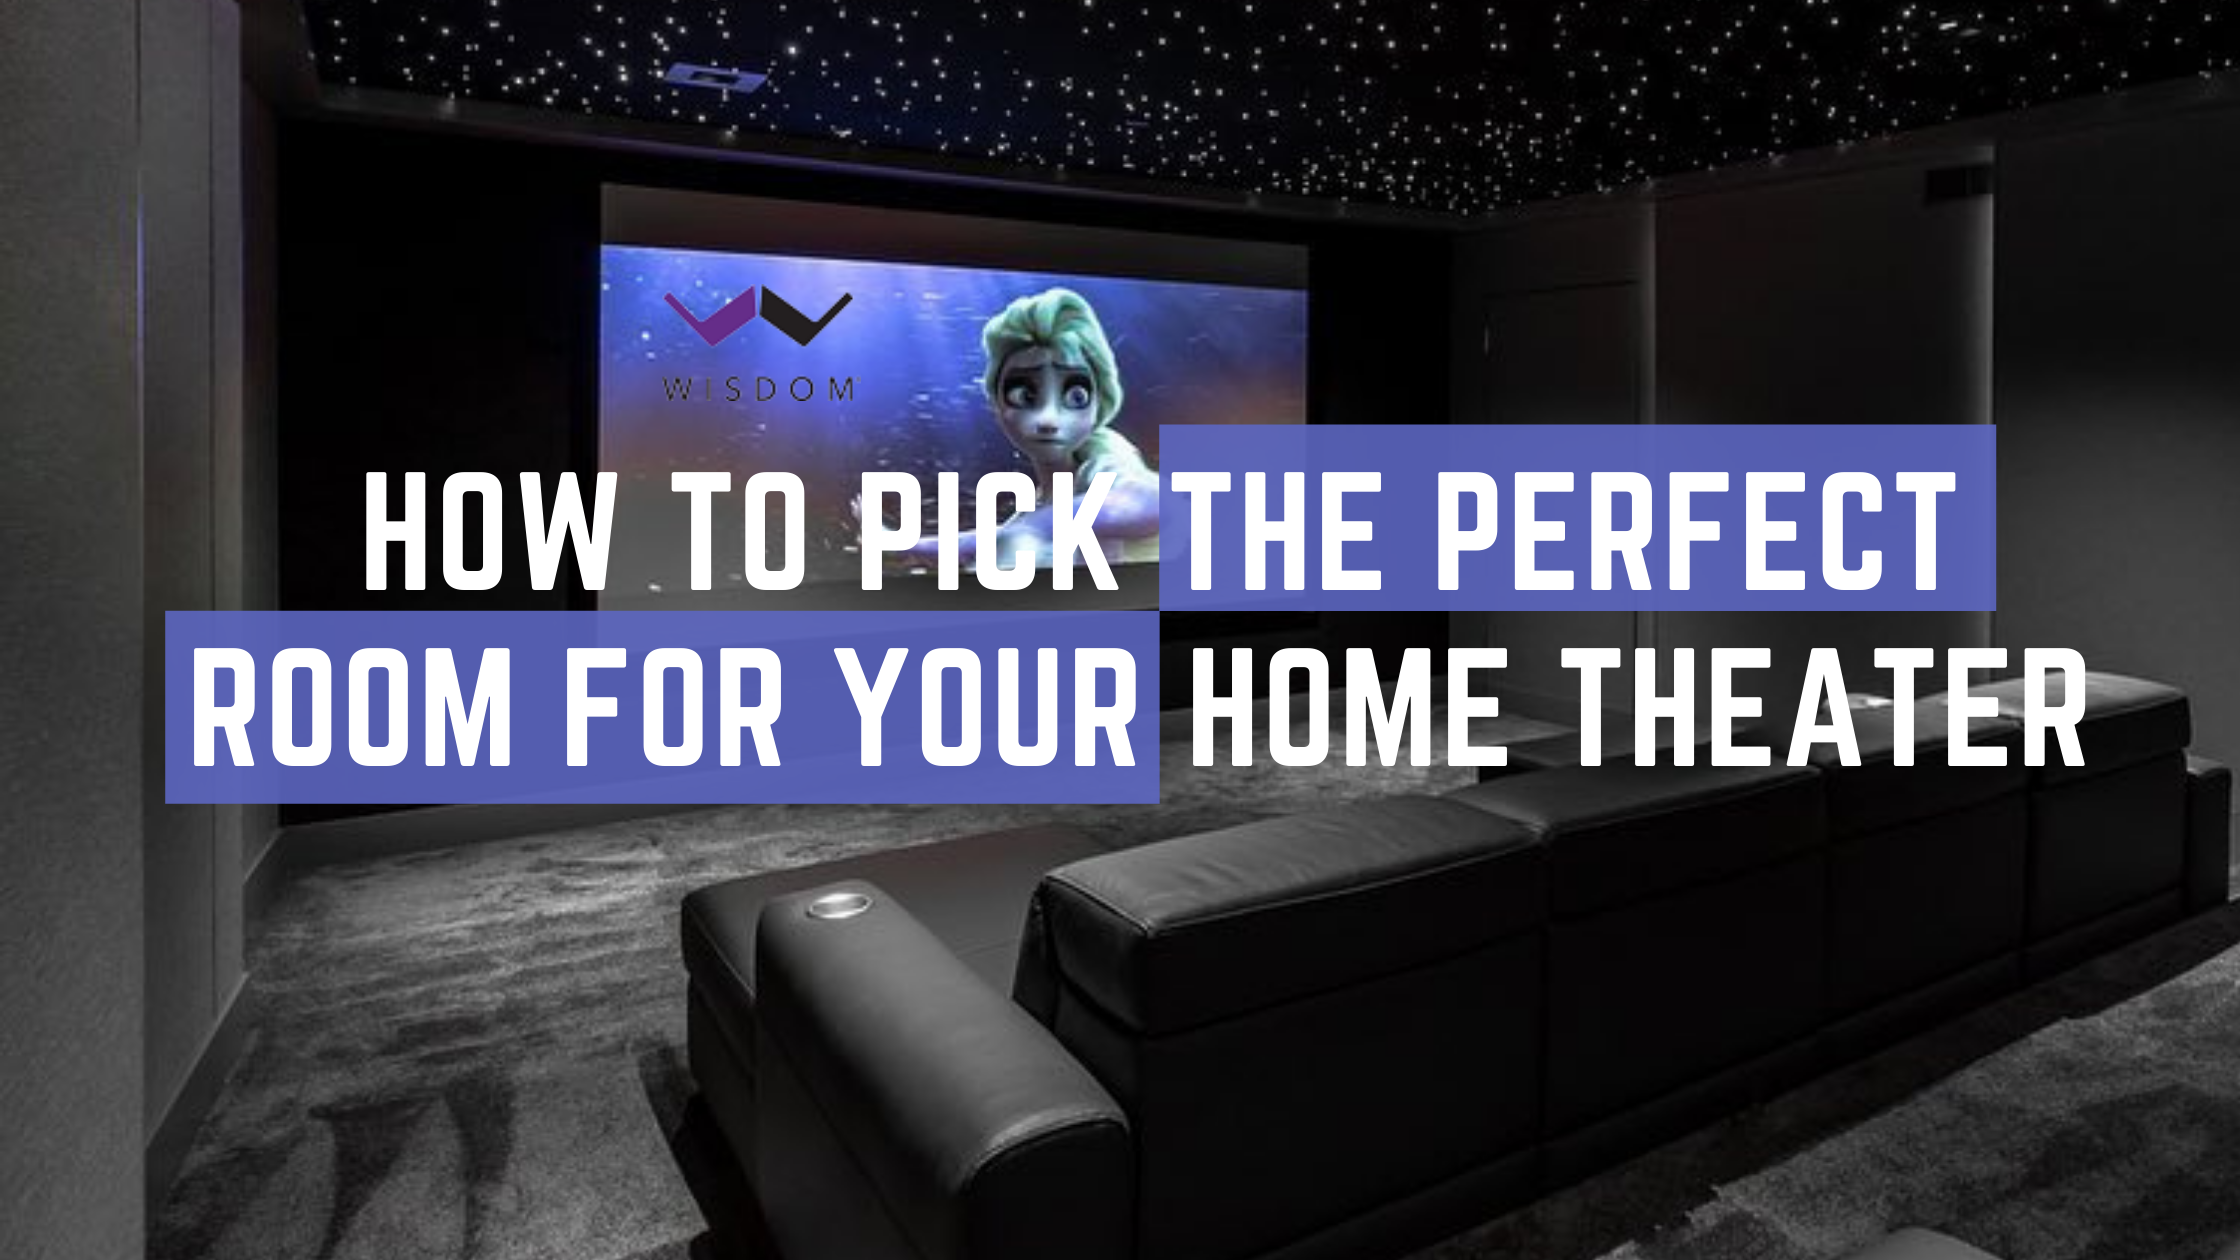 1. How To Pick The Perfect Room For Your Home Theater